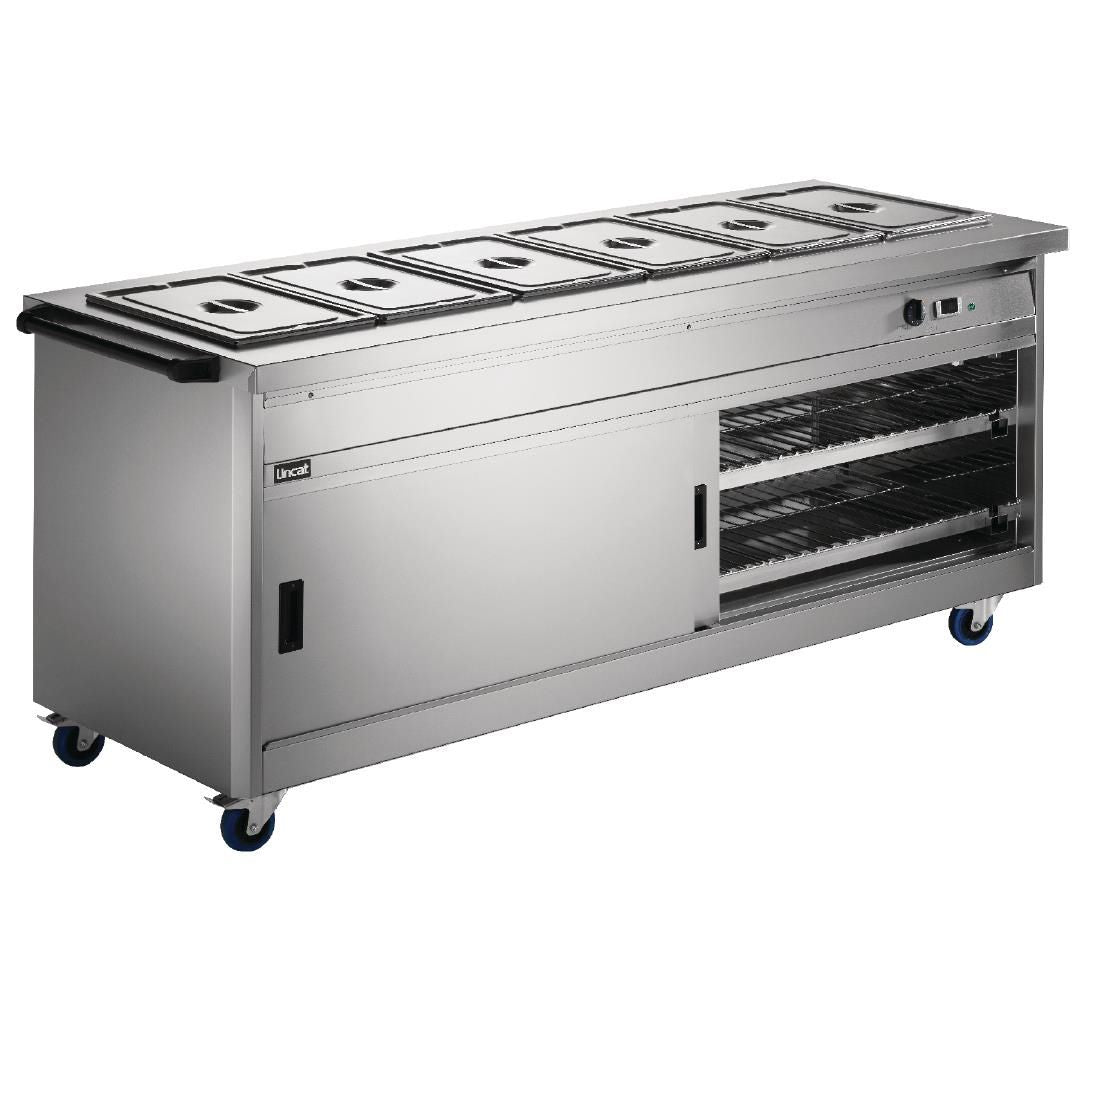 GF373 Lincat Panther Hot Cupboard and Bain Marie Top P8B6 JD Catering Equipment Solutions Ltd